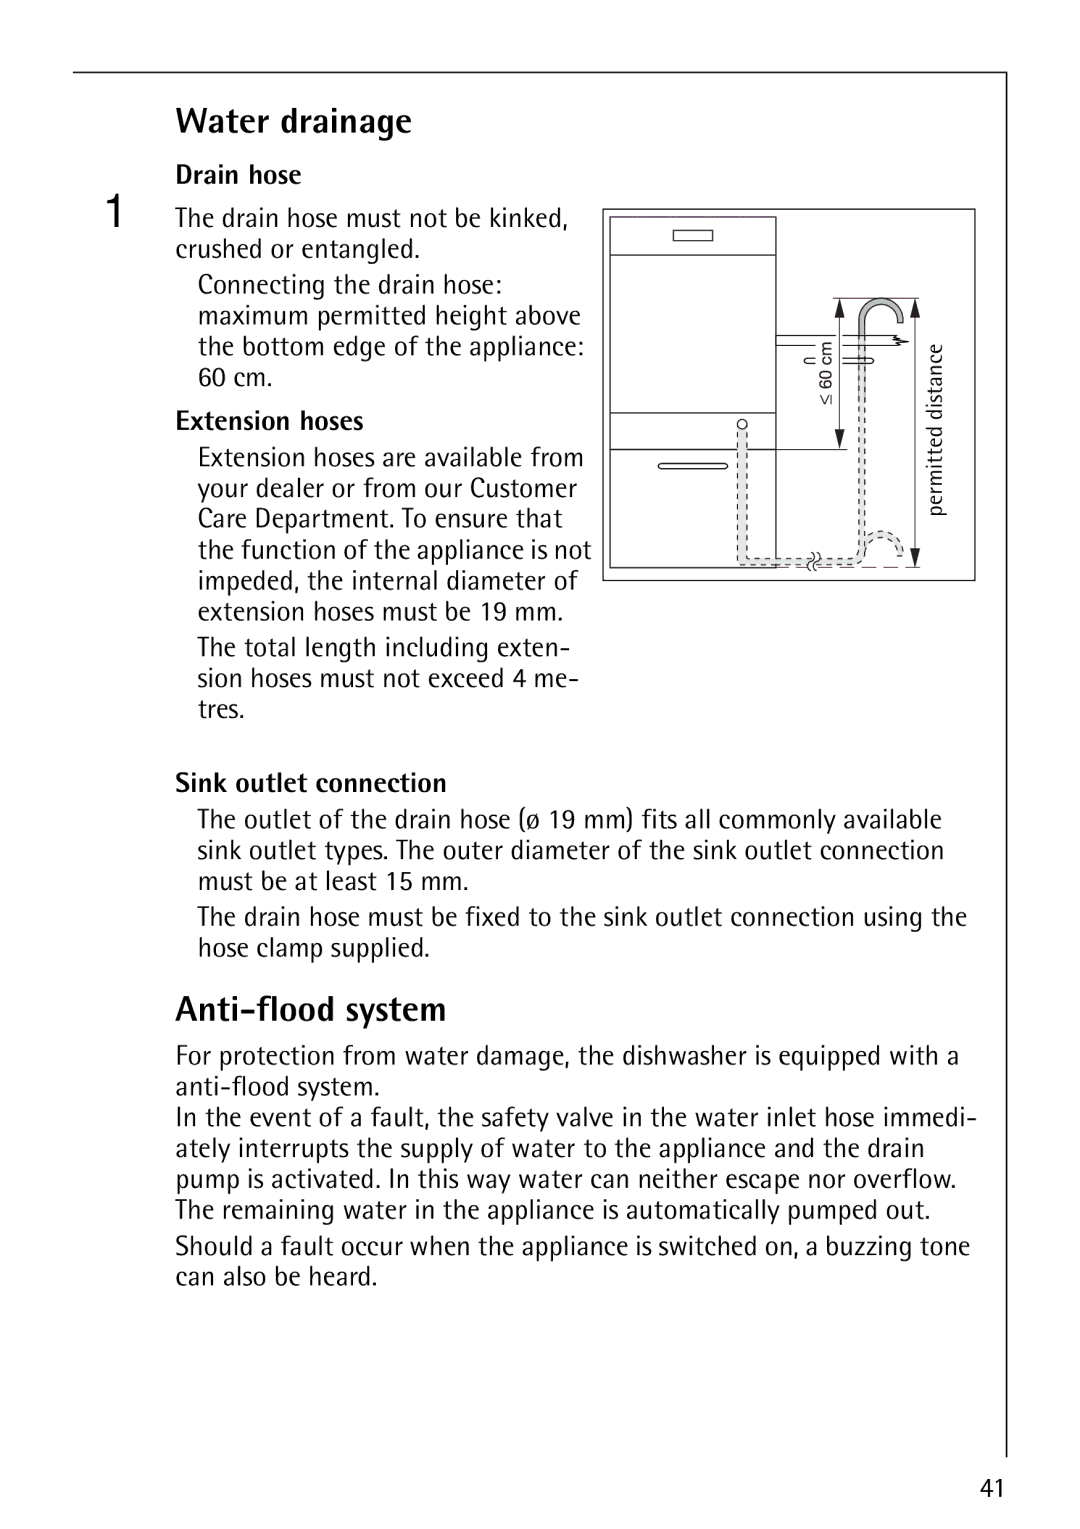 Electrolux FAVORIT 86070i manual Water drainage, Anti-flood system, Drain hose, Extension hoses, Sink outlet connection 